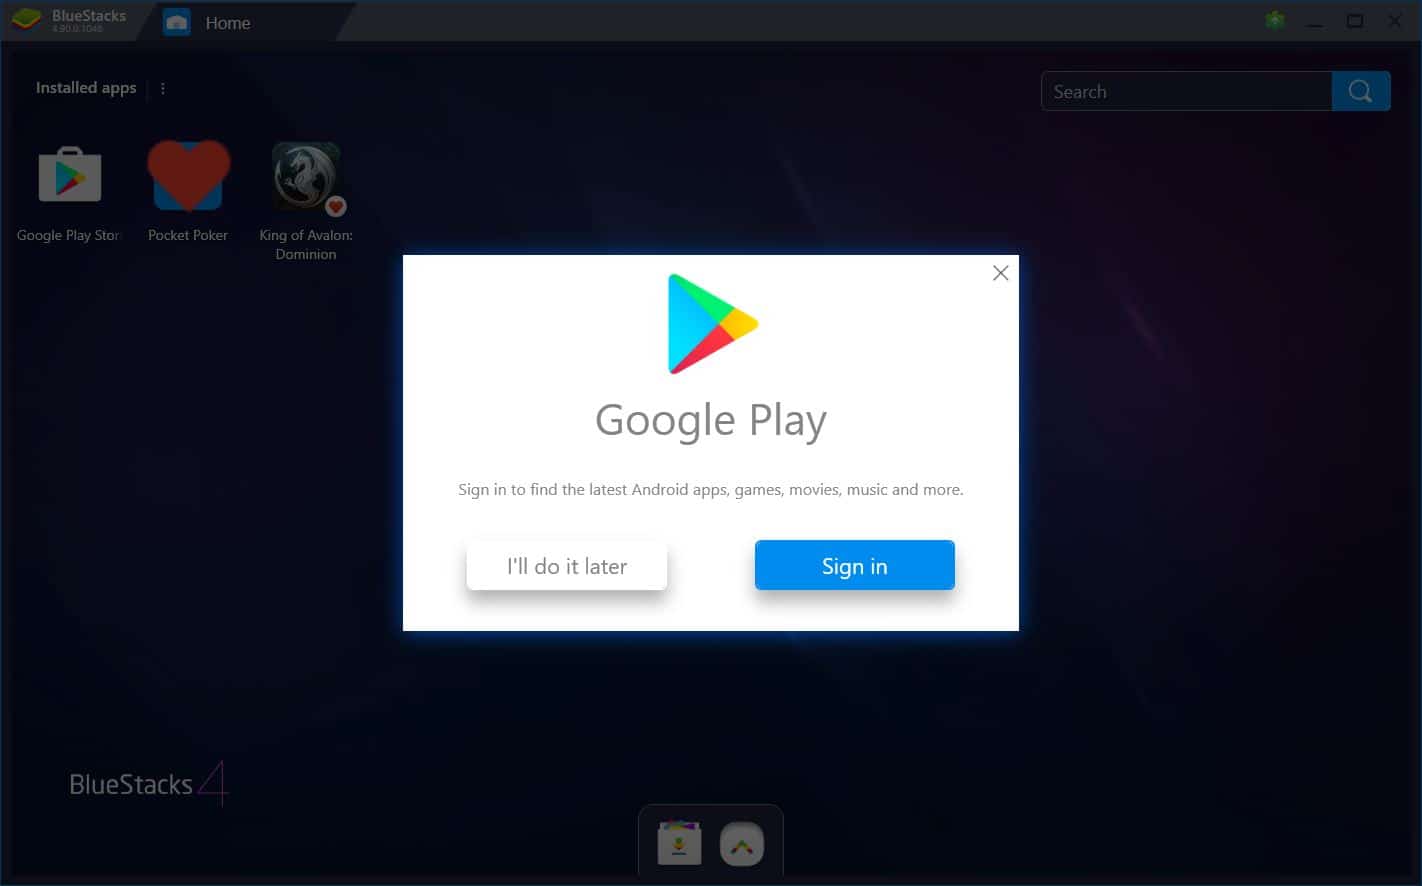 Sign in Google Play on BlueStacks